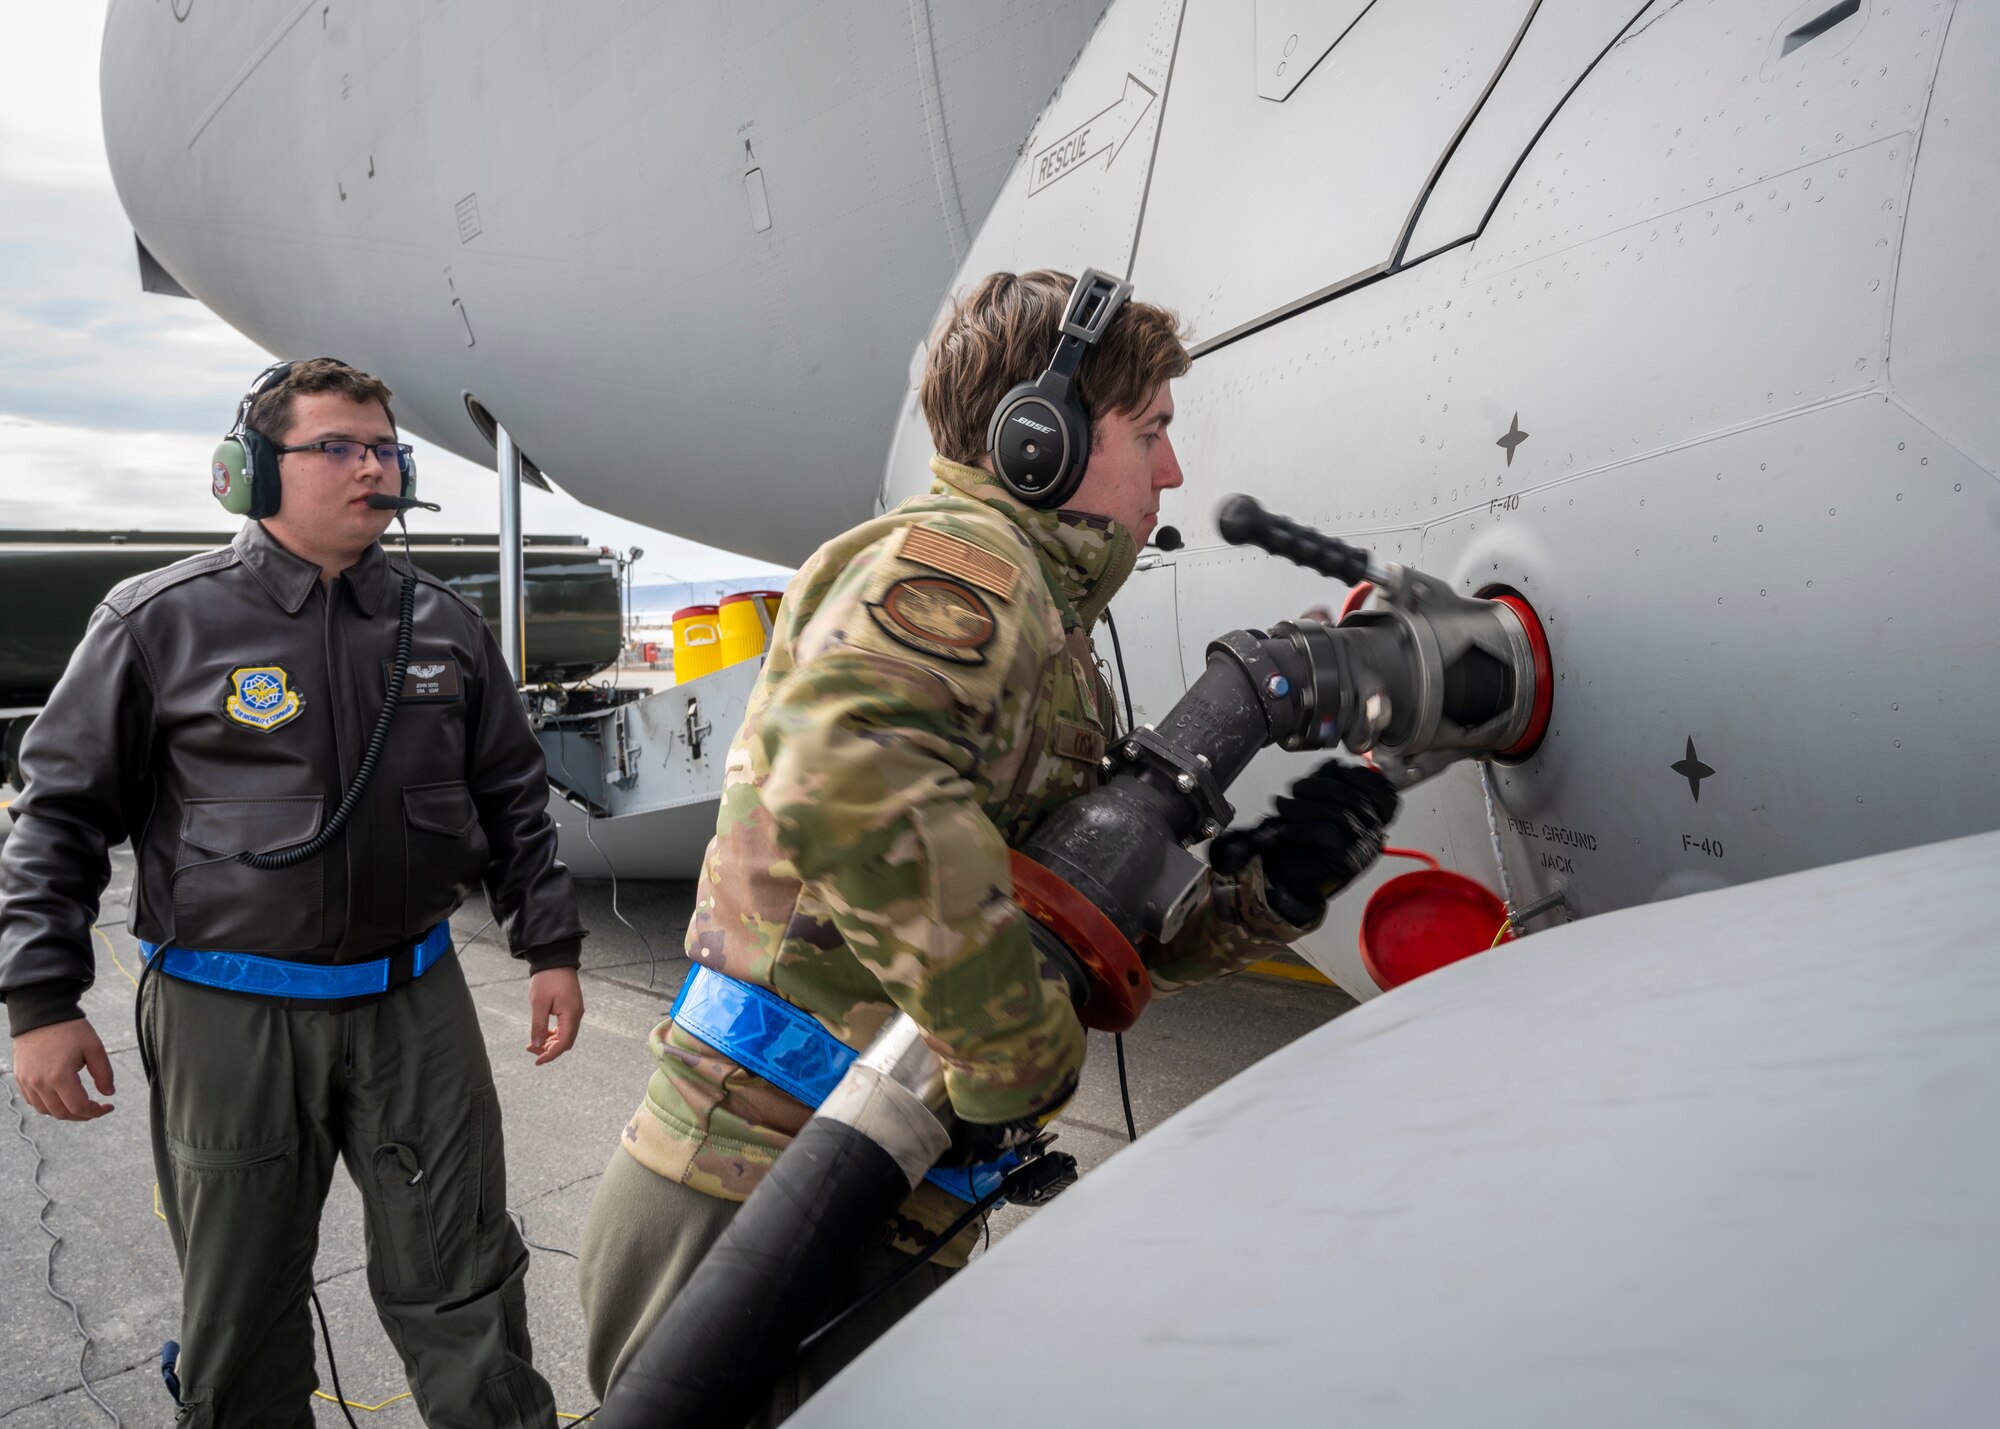 U.S. Air Force Airmen assigned to the 140th Wing and 4th Airlift Squadron preform a wet-wing defuel during exercise Amalgam Dart 21-01, June 16, 2021 at Thule Air Base, Greenland.